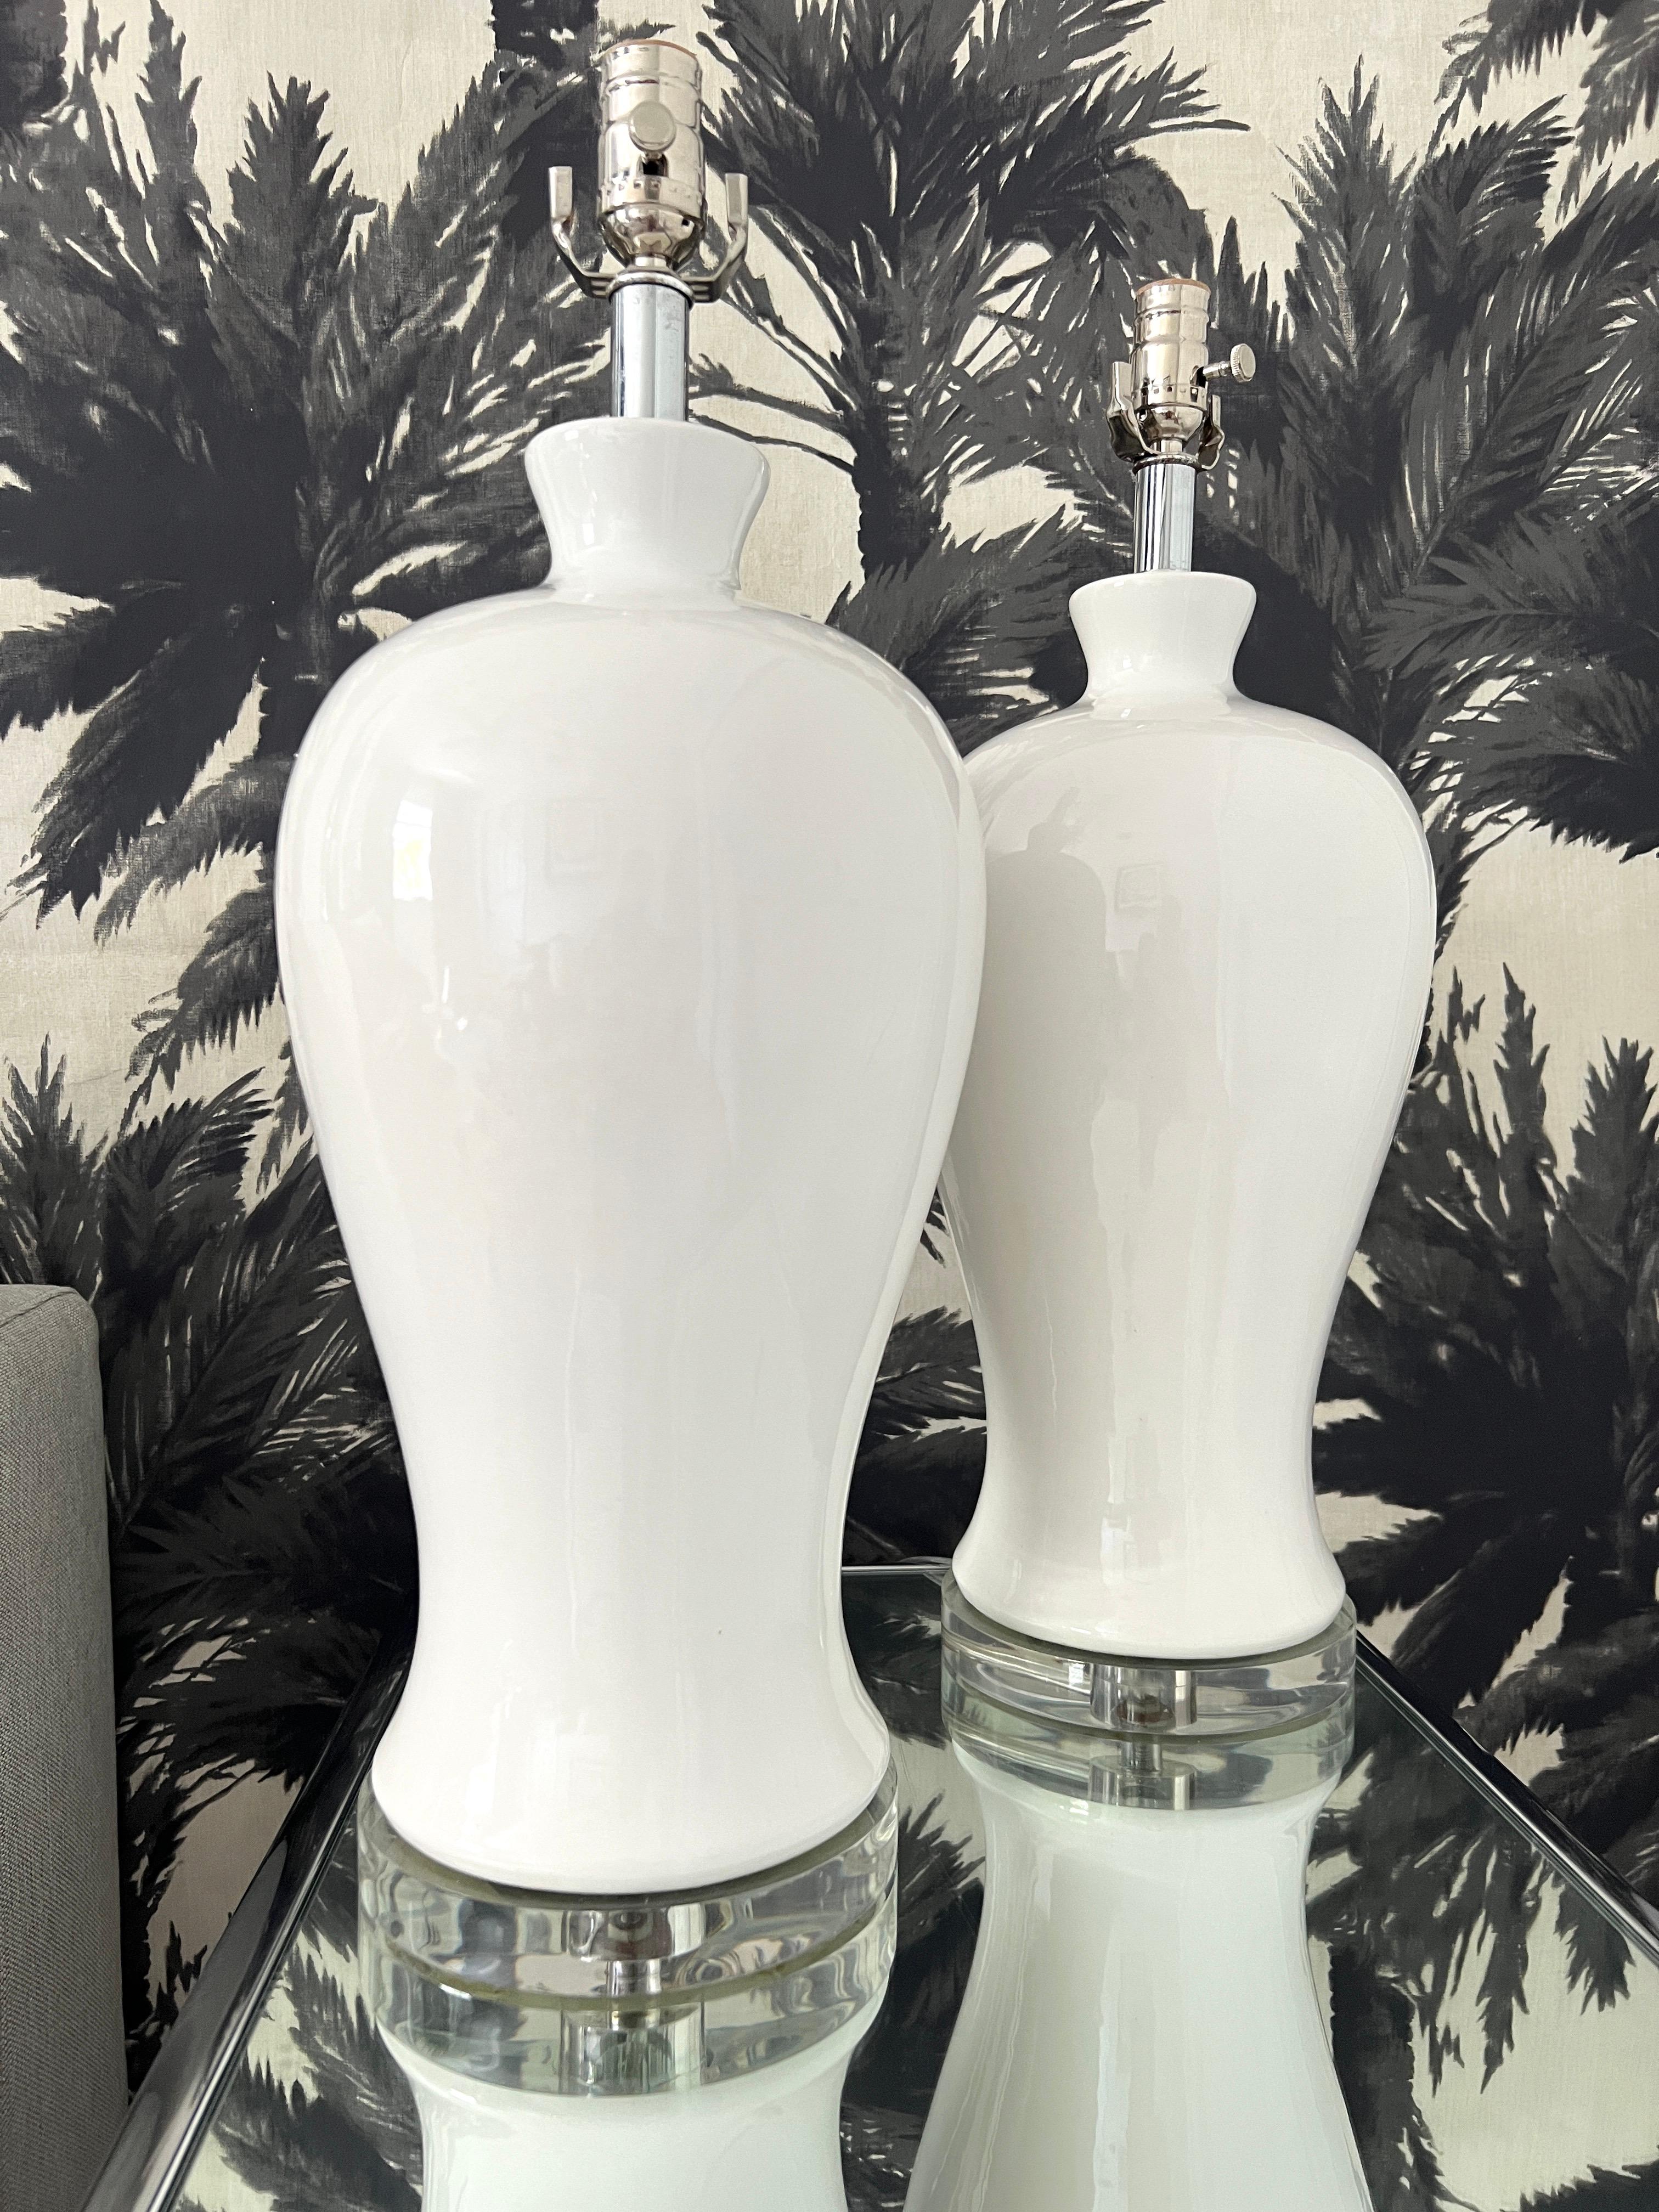 Polished Pair of Modernist Ceramic Urn Lamps in White Glaze with Lucite Bases, c. 1960's For Sale